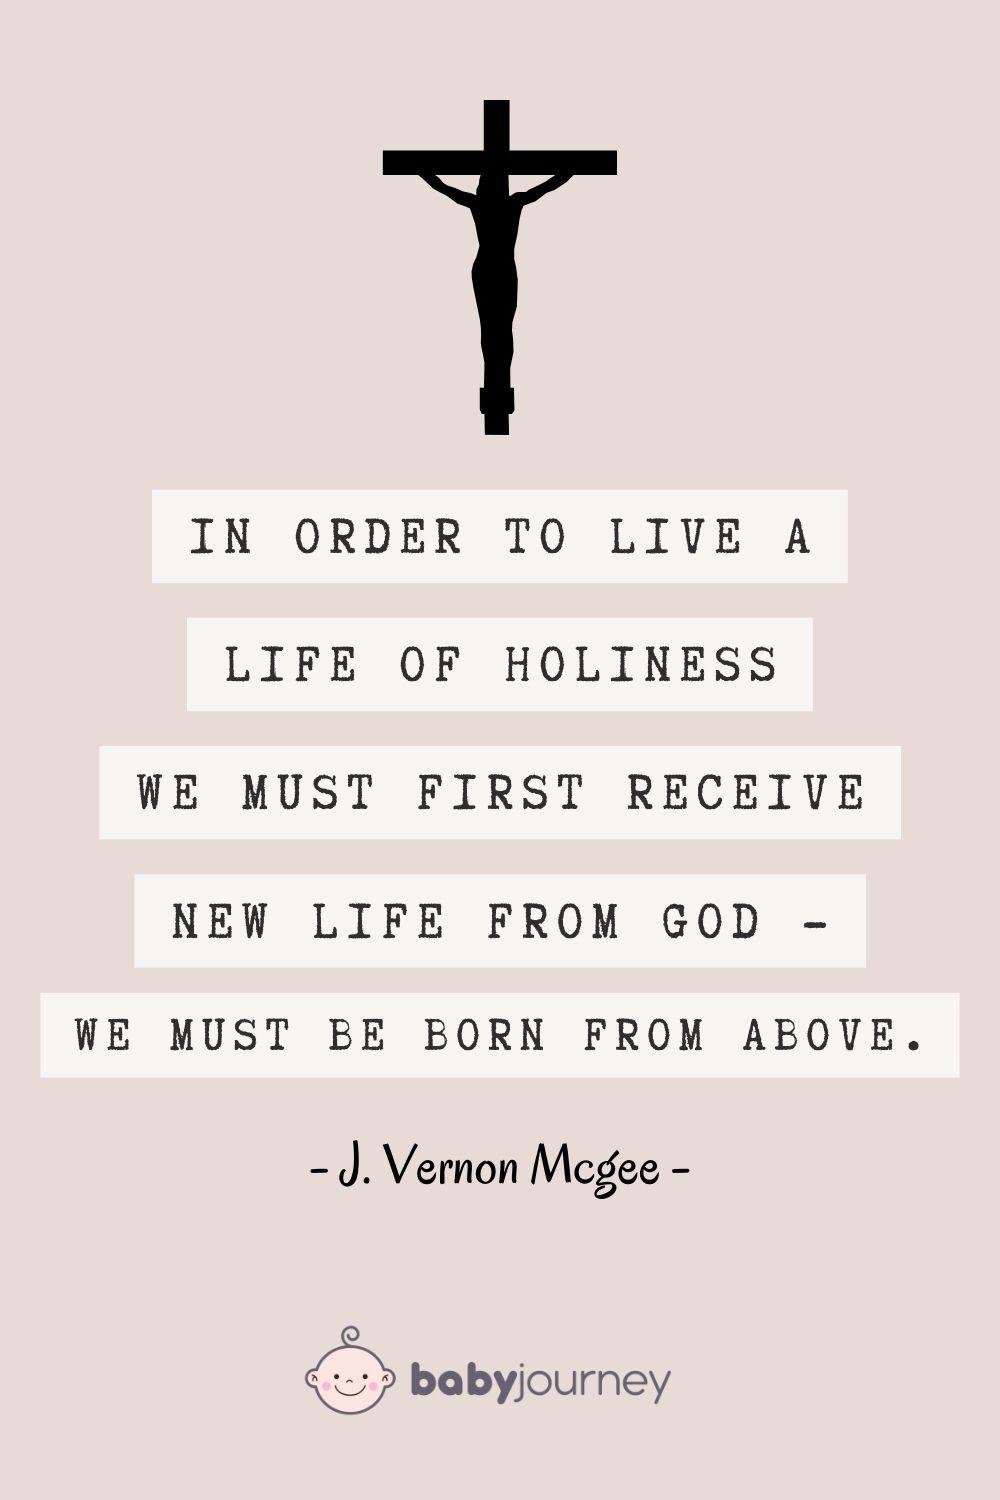 In order to live a life of holiness, we must first receive new life from God — we must be born from above. - J. Vernon Mcgee - Sweet baptism words quotes sayings - Baby Journey